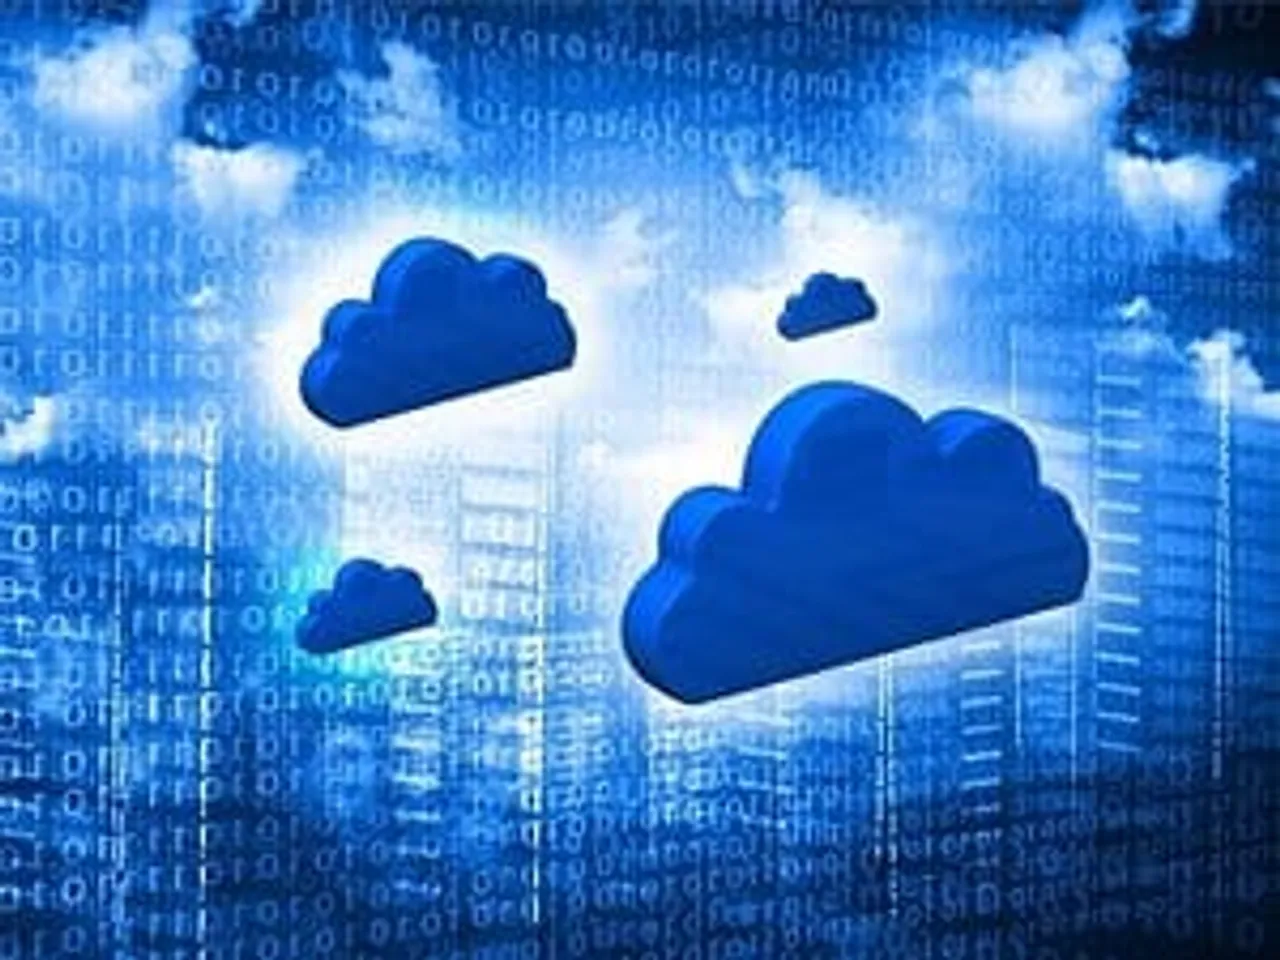 Cloud infrastructure reality is outperforming perception- Oracle study